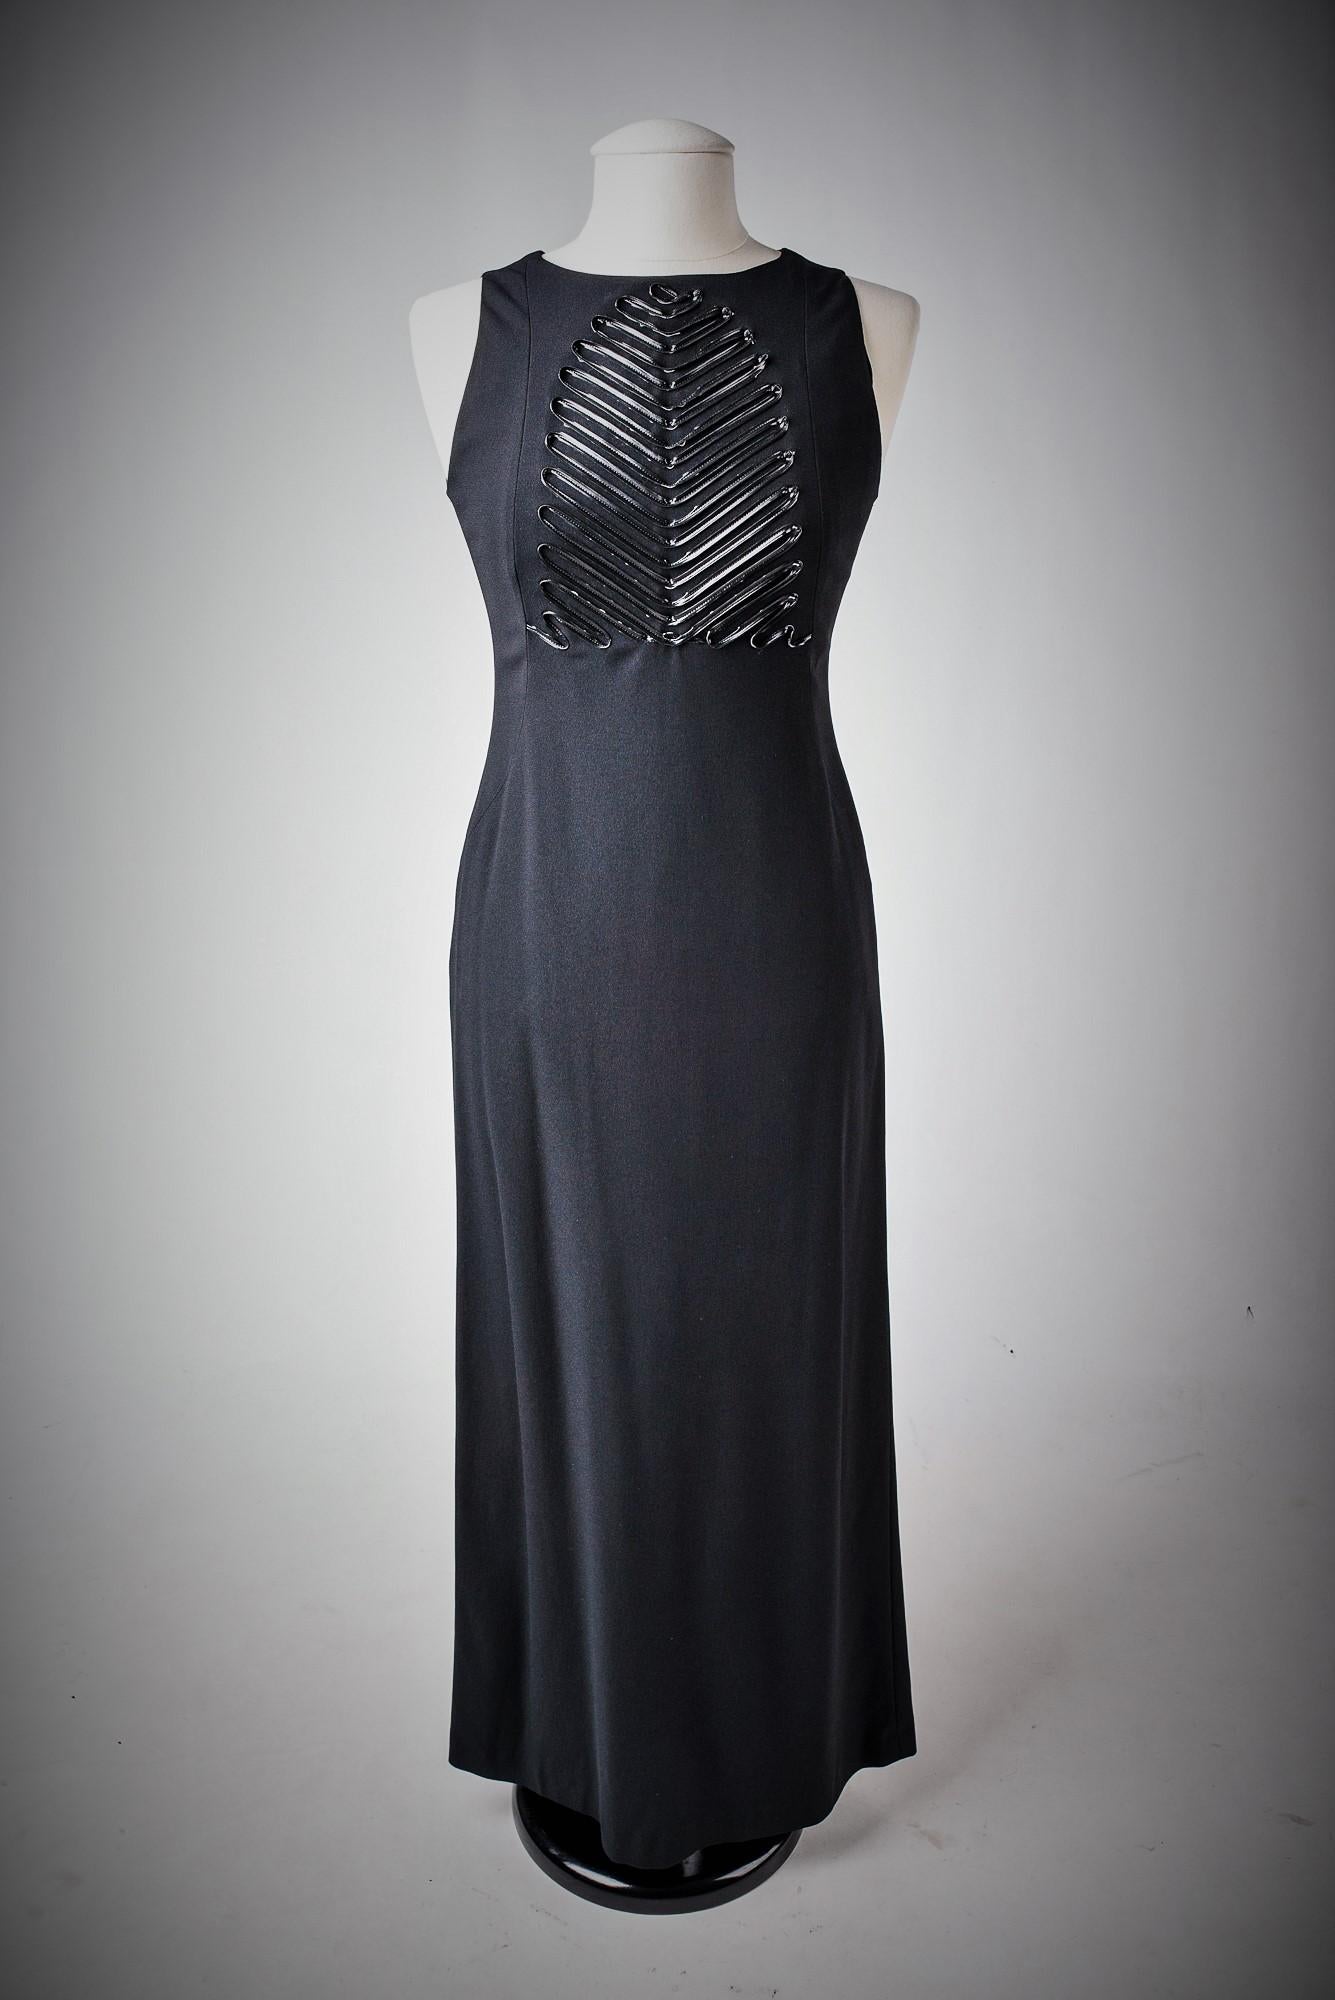 A Long Evening Black Dress by Claude Montana - French Circa 1999 For Sale 2